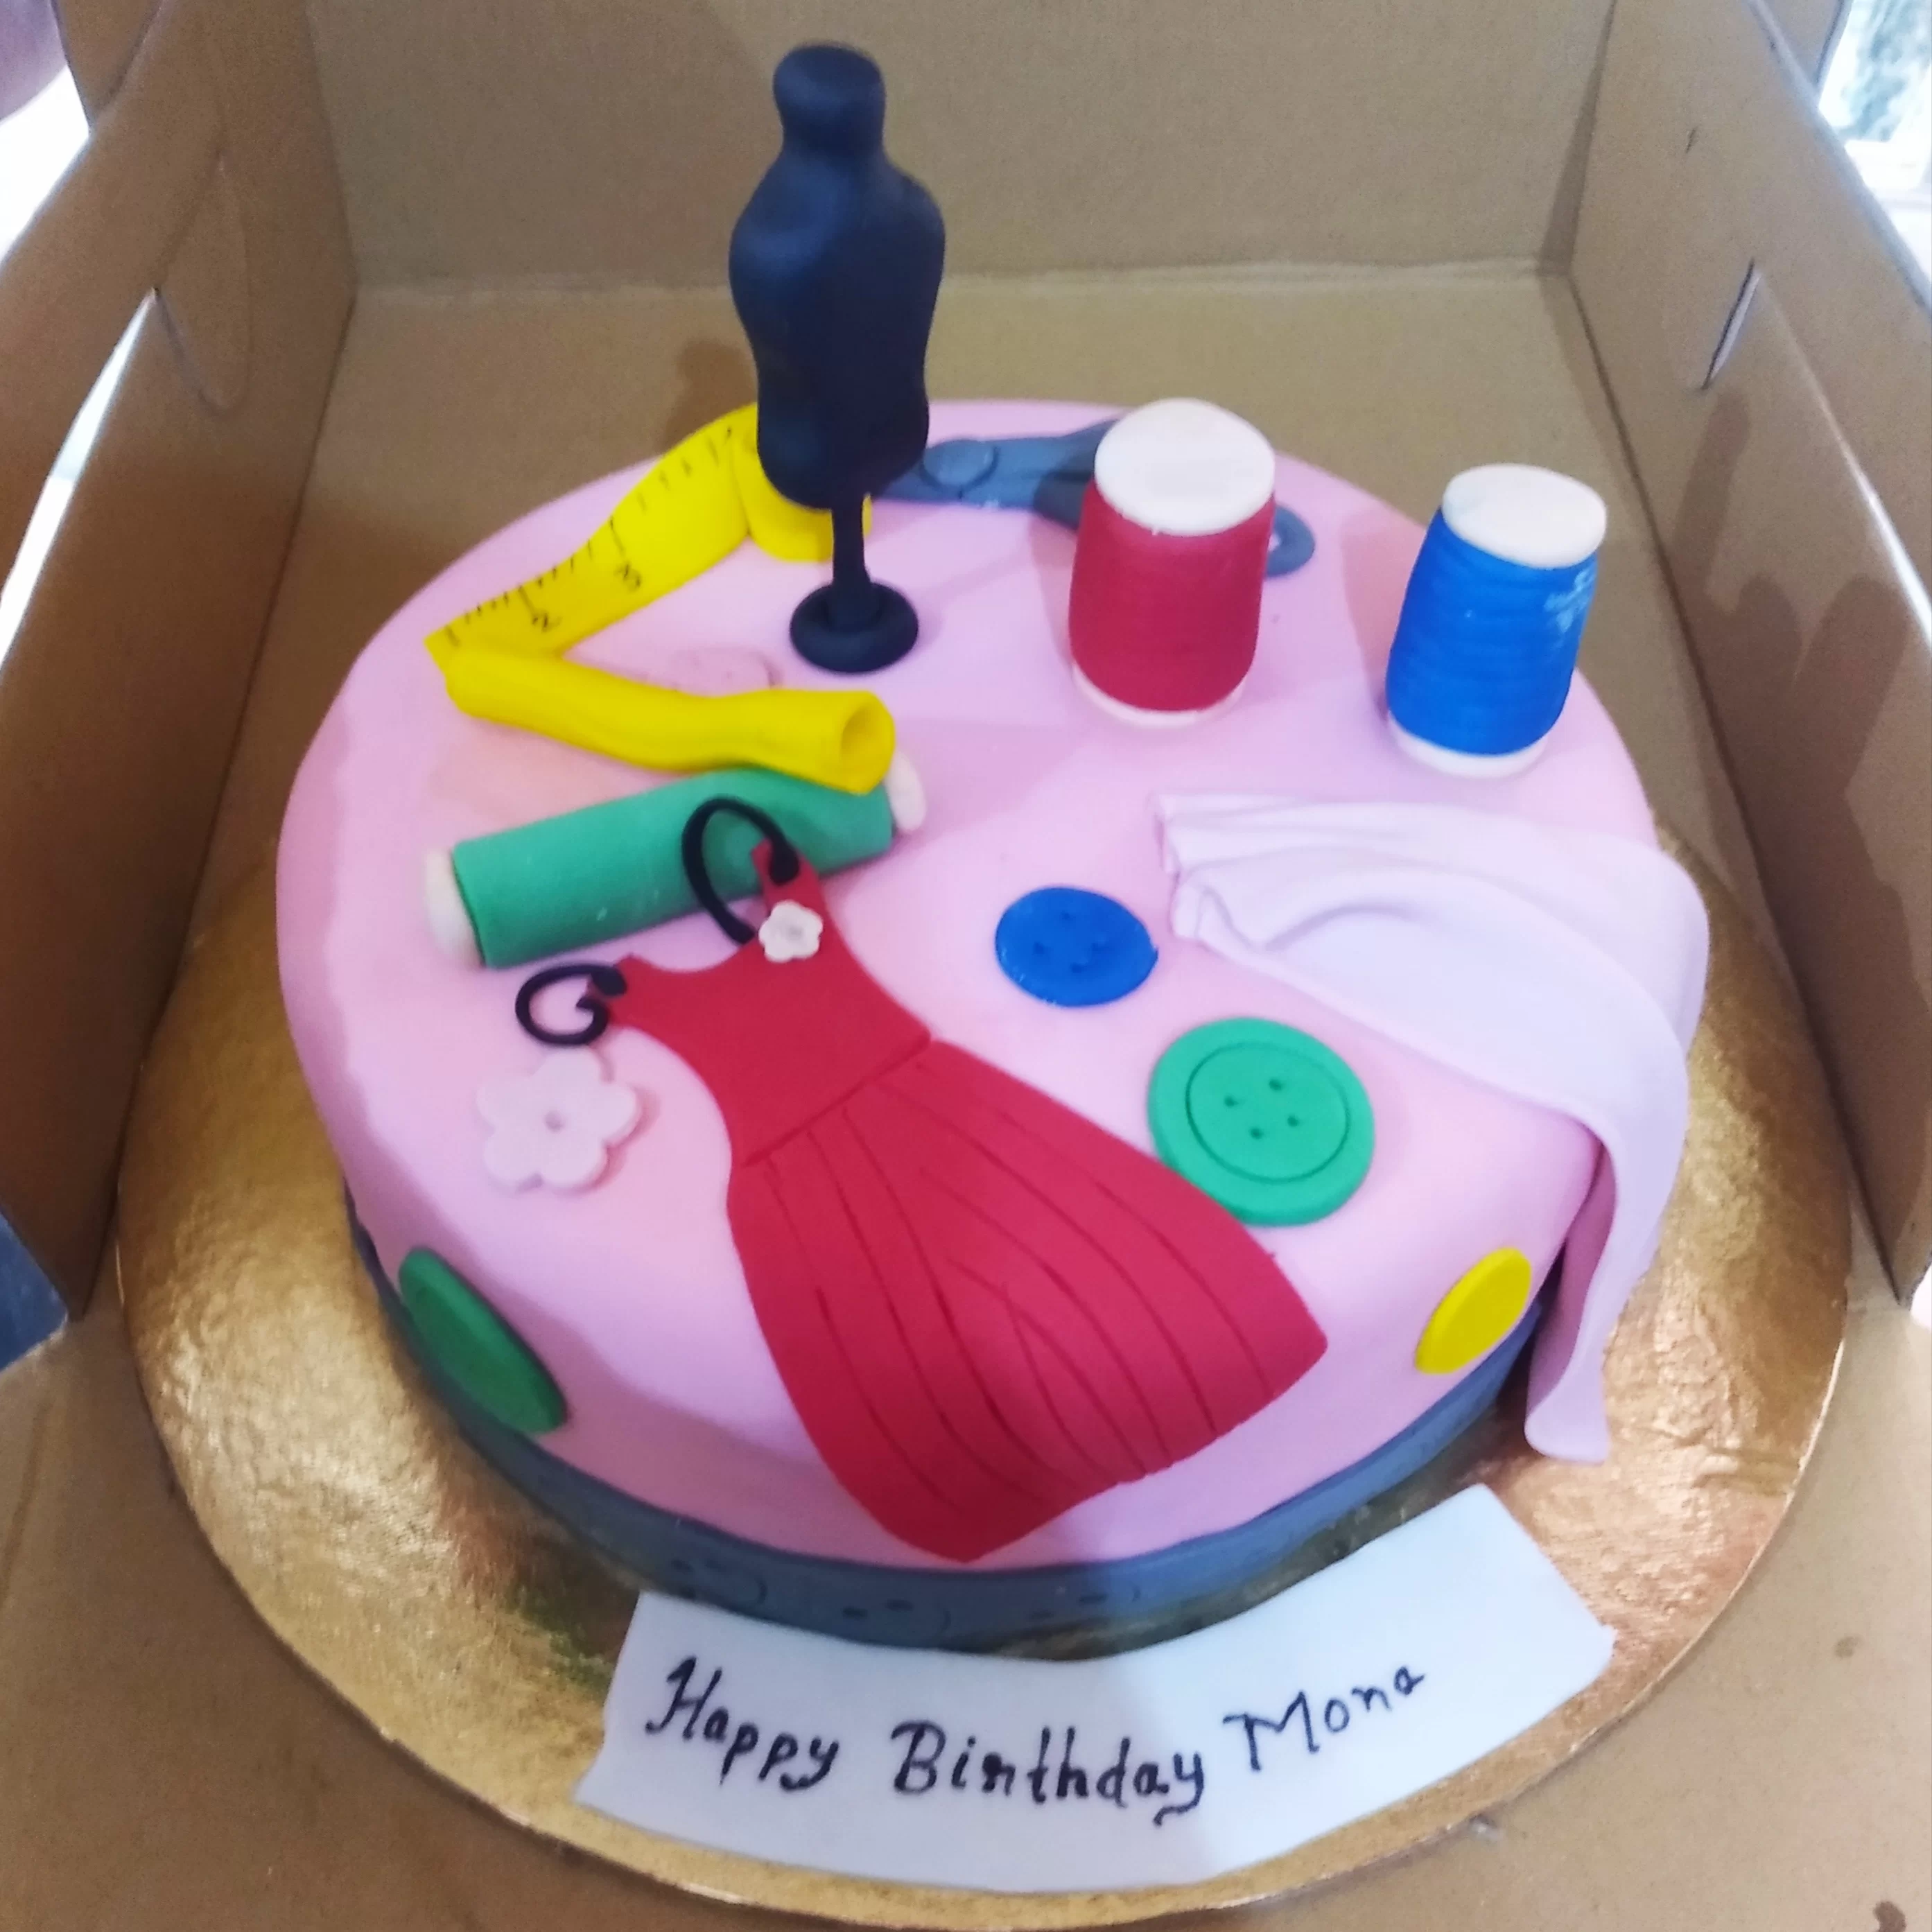 Birthday Cake Decorated With Shower Curtain by All Rights Reserved  @tailortang - Photos.com